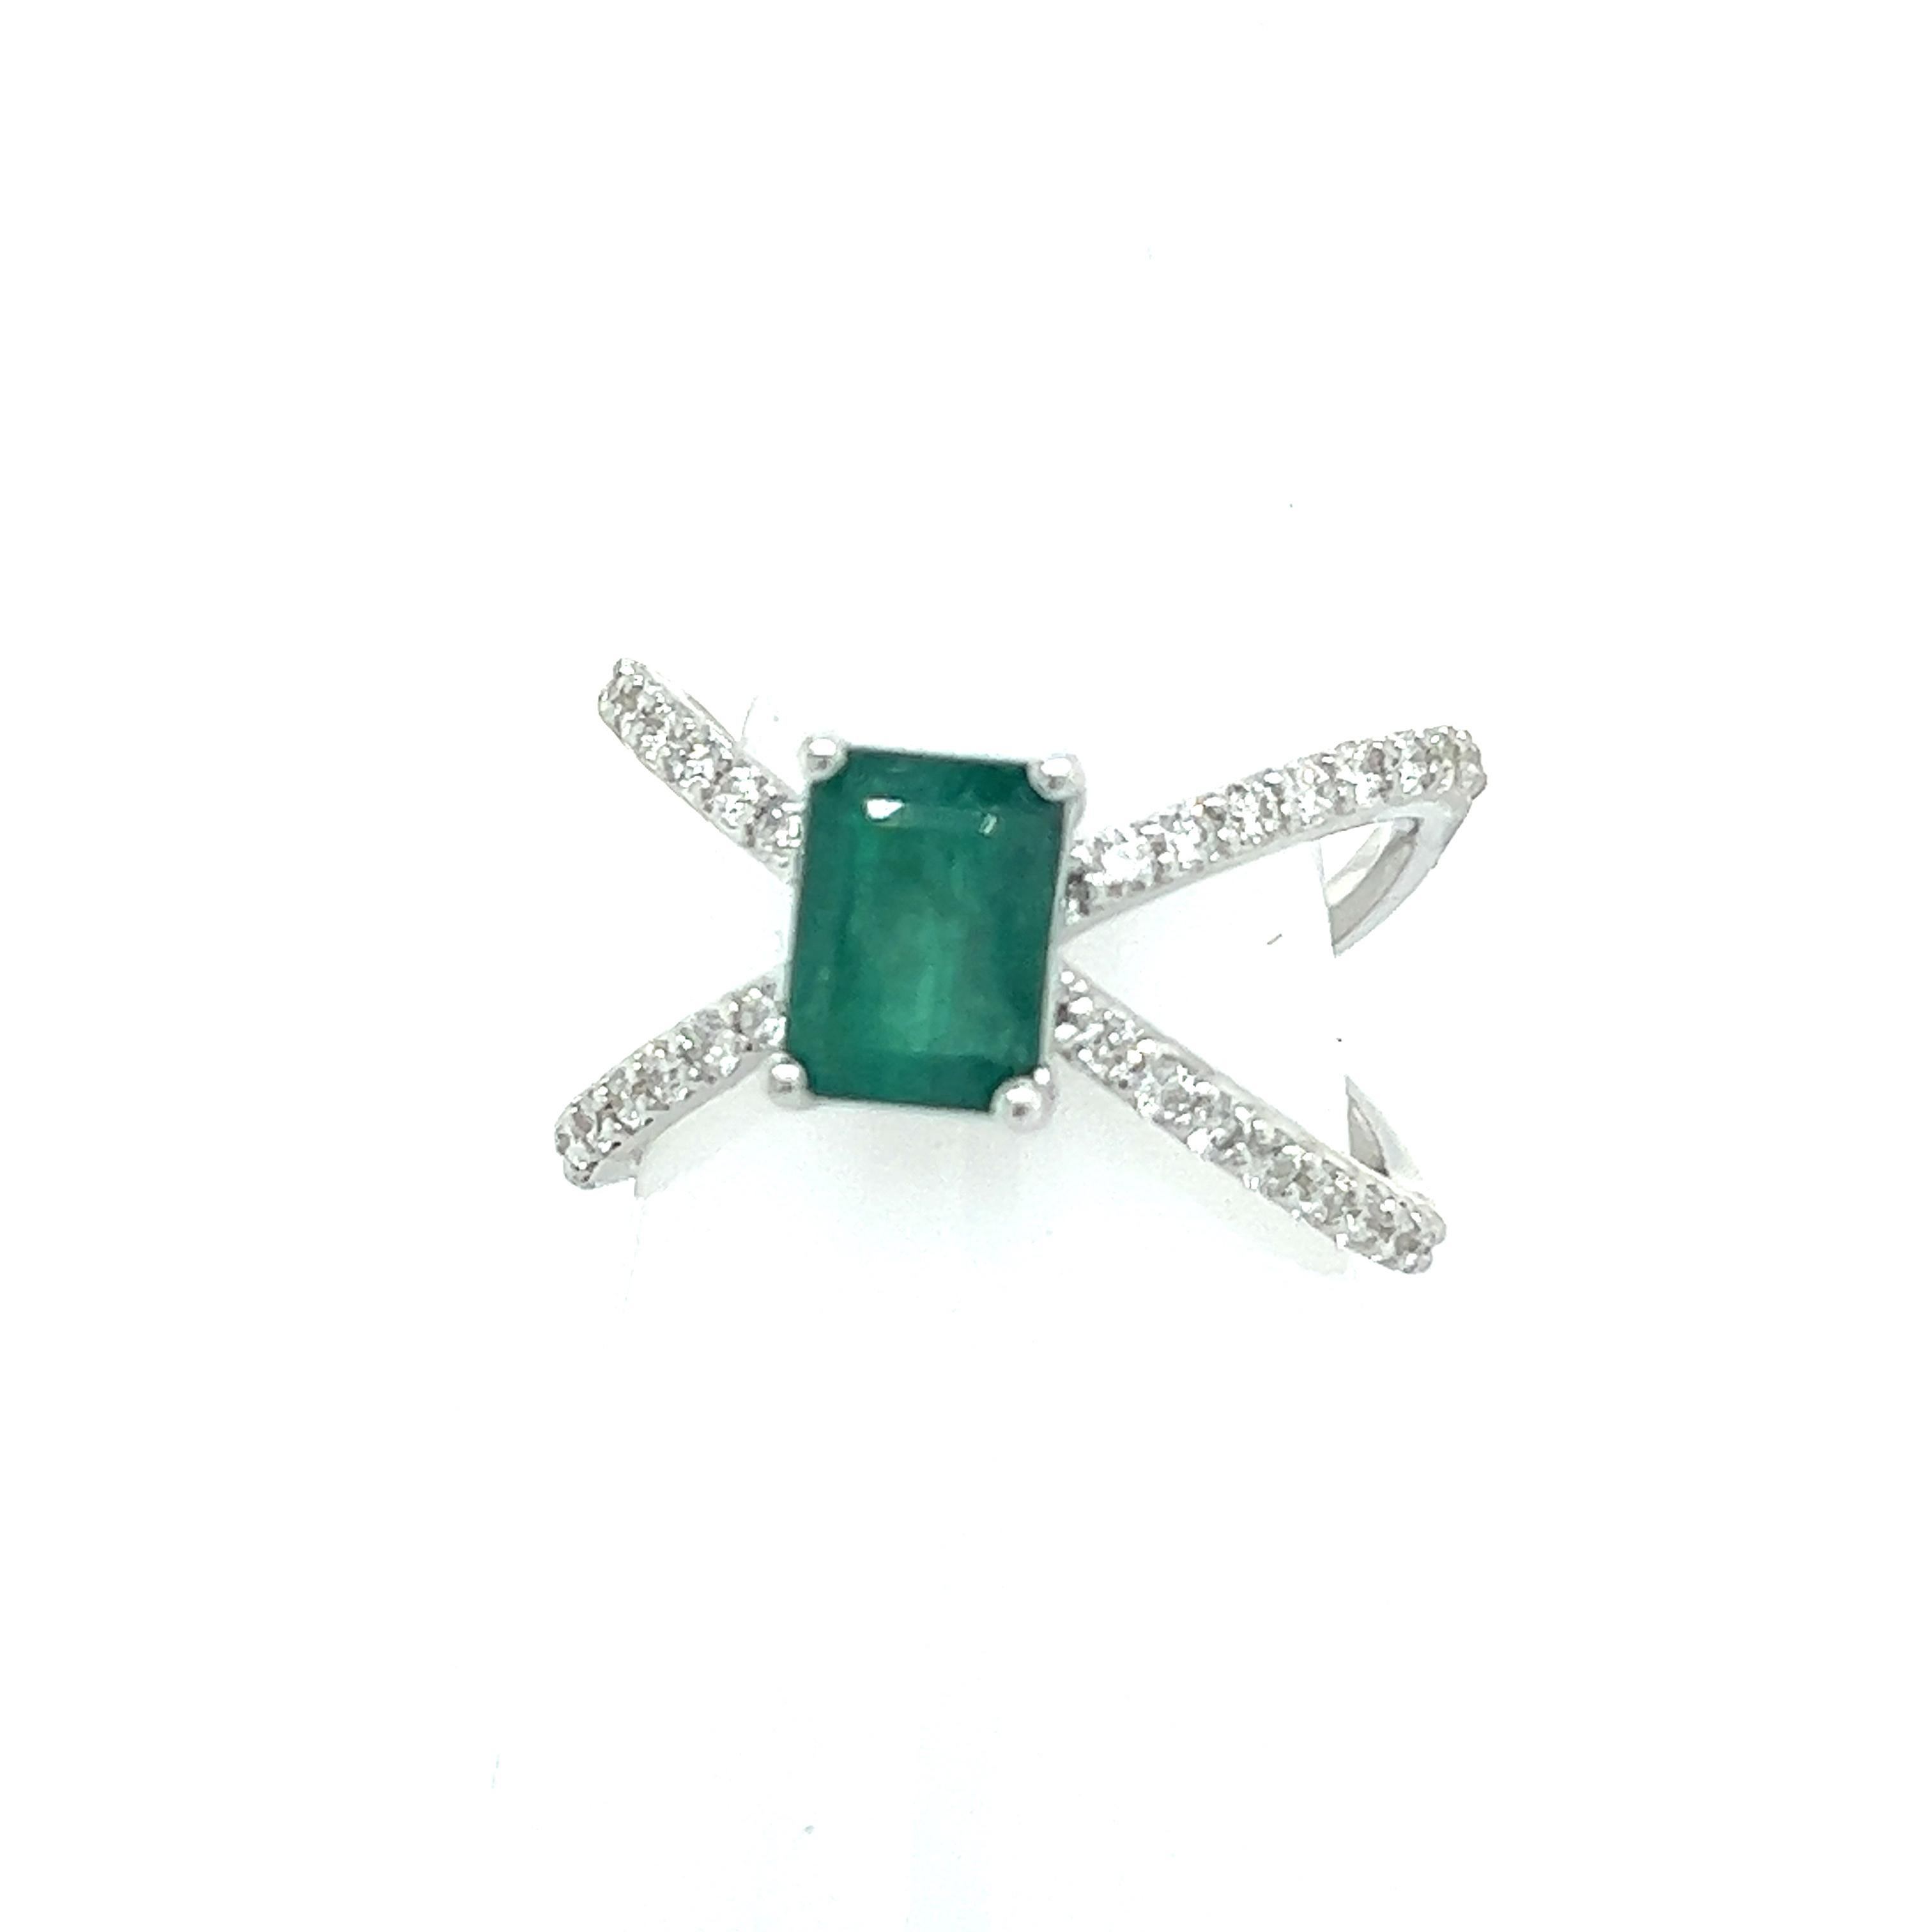 Natural Emerald Diamond Ring 14k W Gold 1.7 TCW Certified For Sale 1